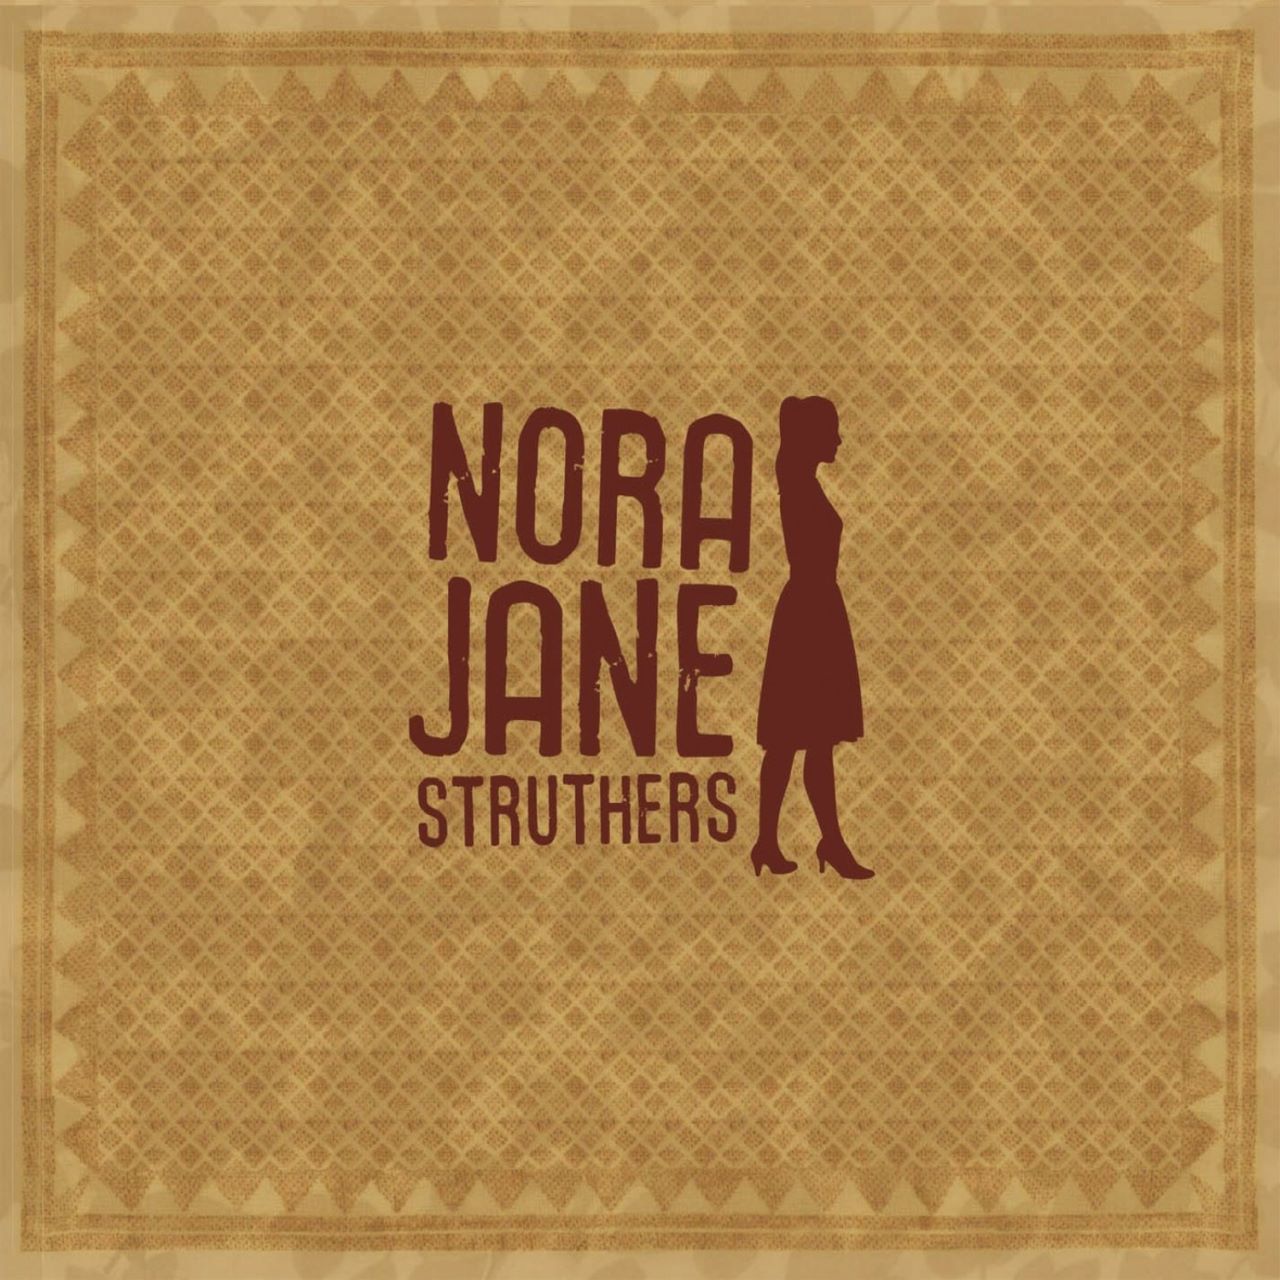 Nora Jane Struthers - Nora Jane Struthers cover album